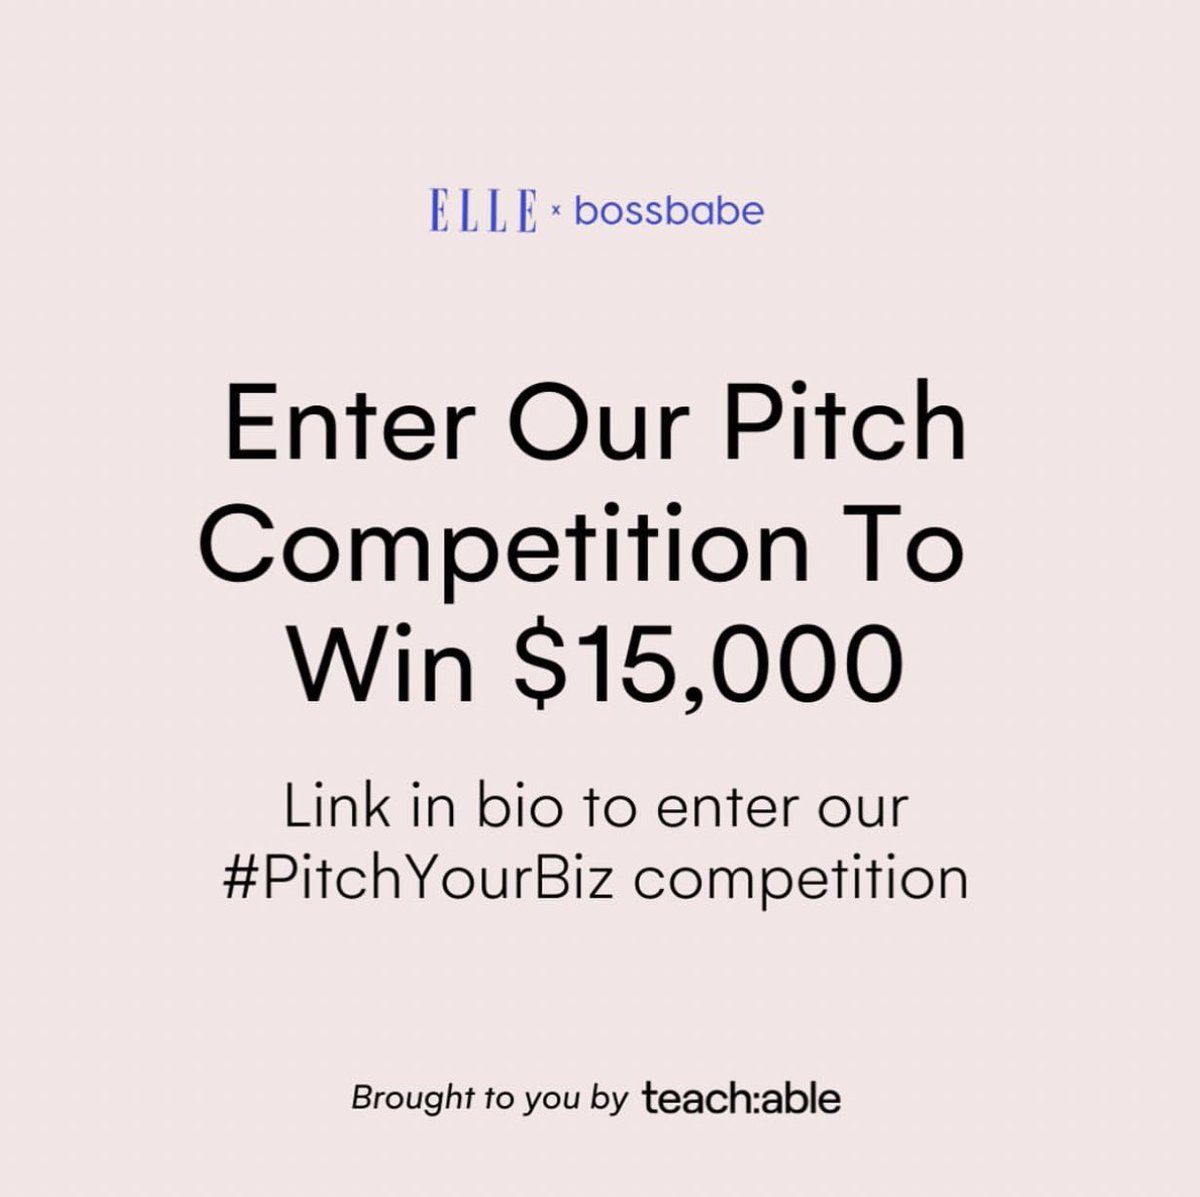 Elle x BossBabe have partnered up for the  #PitchYourBiz pitch competition for all boss babes to win $15K. 10 finalists will be chosen and the pitch contest is live on 10/23.Finalists will be announced Aug. 3rd! https://bossbabe.com/elle/ 